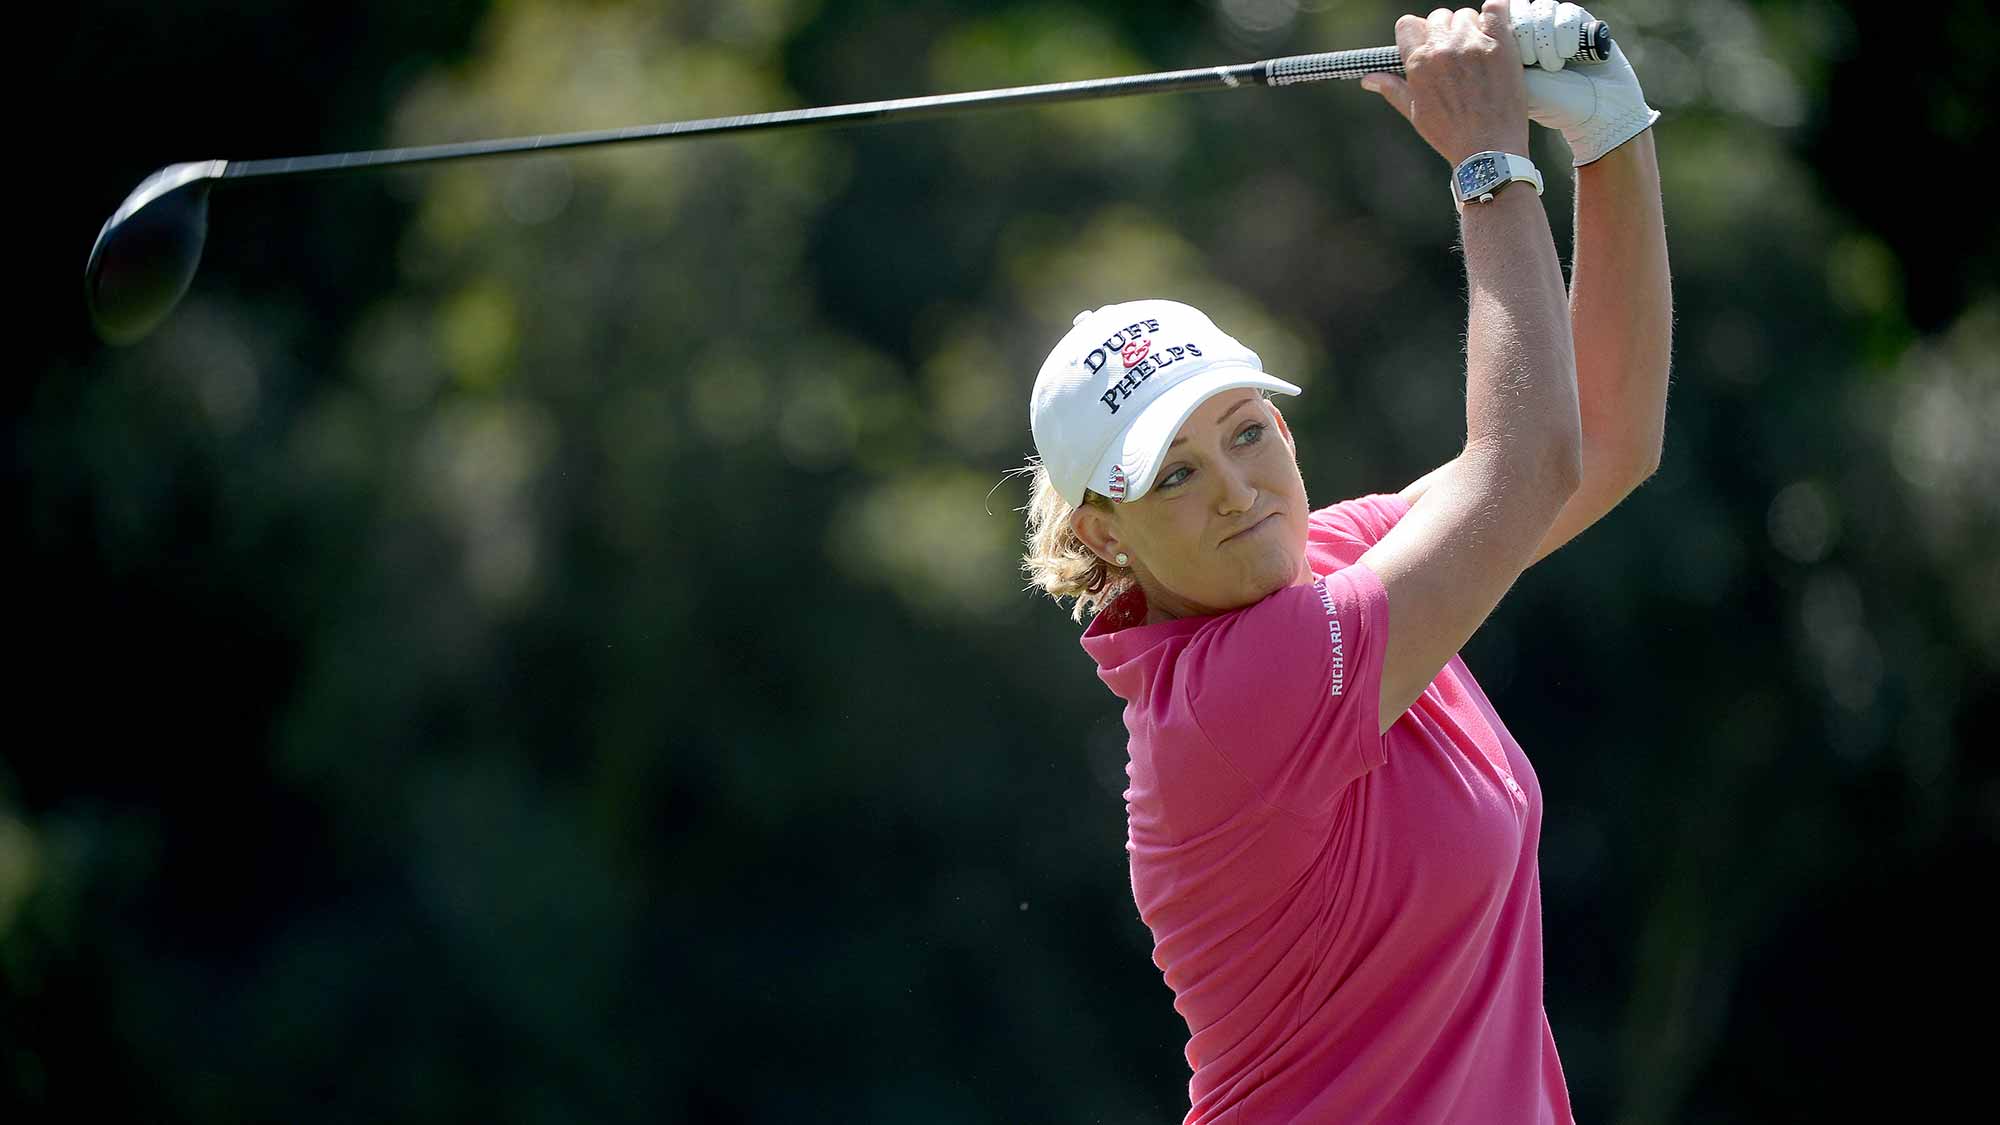 Cristie Kerr tees off the 2nd hole during Final Round of the LPGA KIA Classic at the Aviara Golf Club